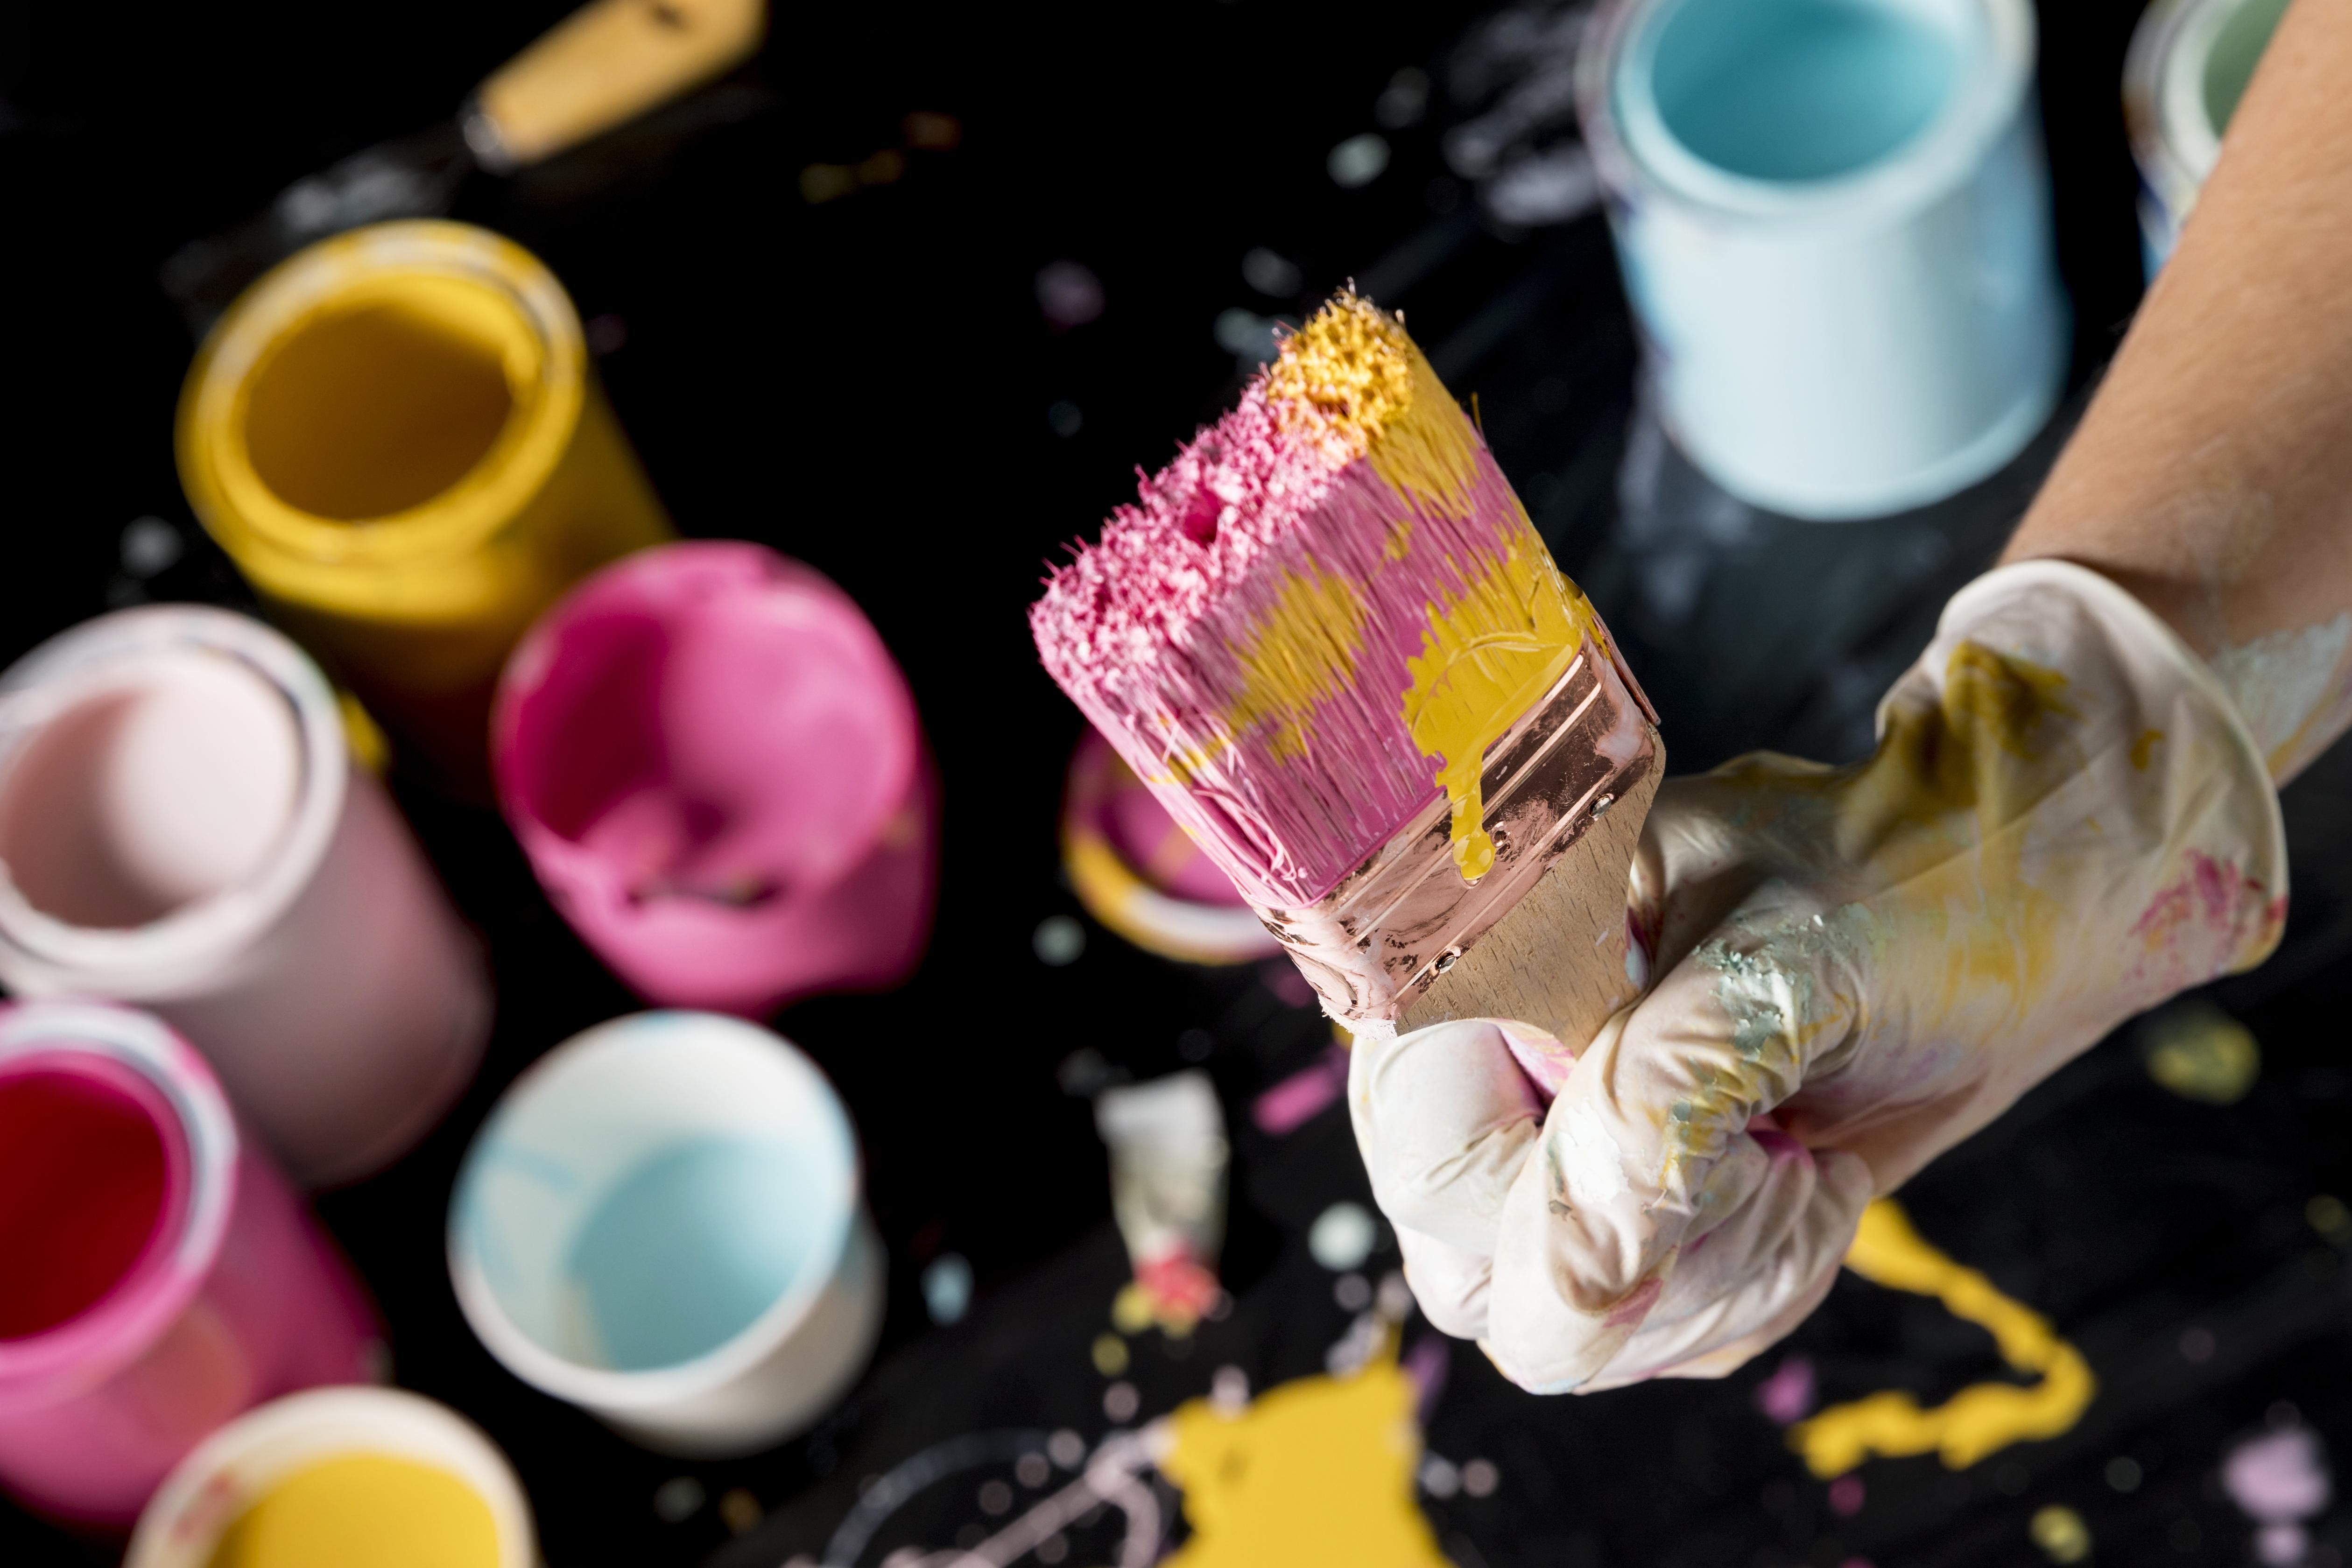 Aggressive growth strategy adopted by paint businesses may hit sector profits in India